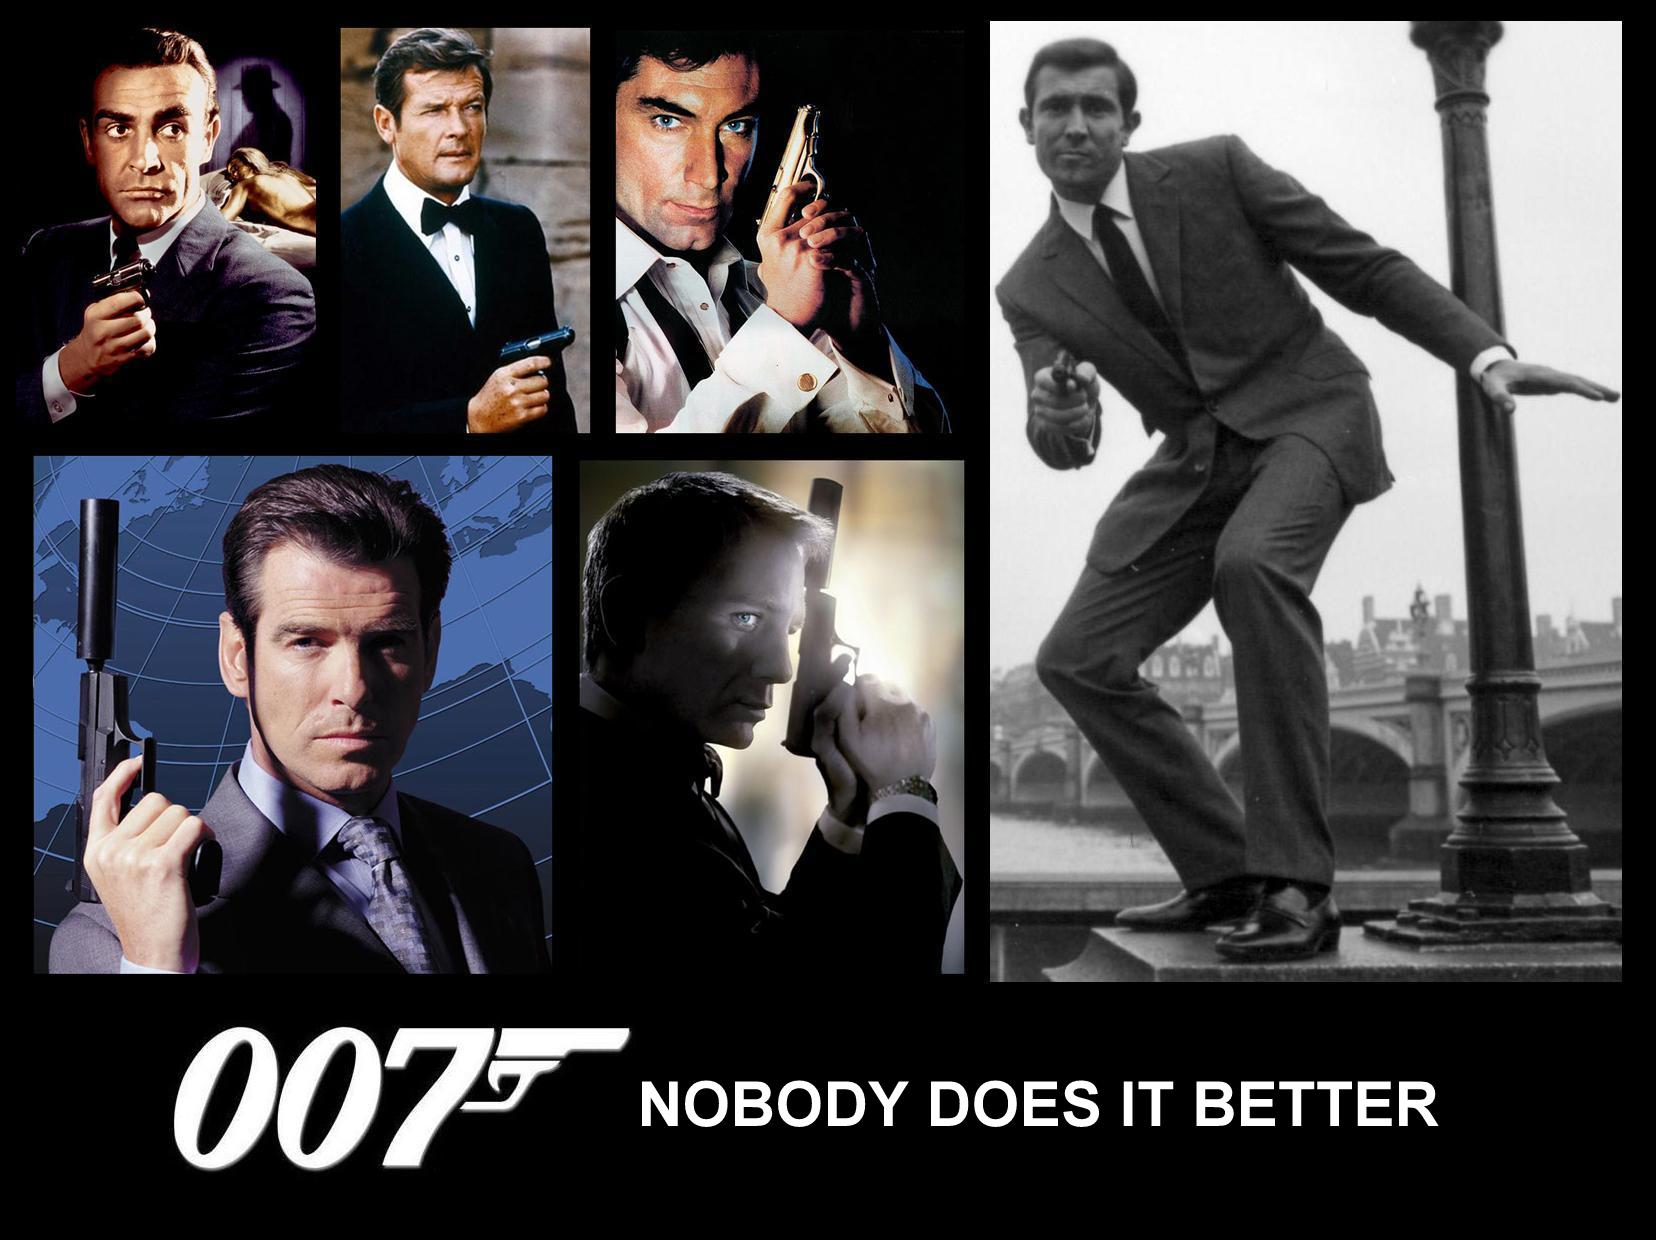 Infinit images 007-Nobody-Does-it-Better-james-bond-32669270-1656-1240